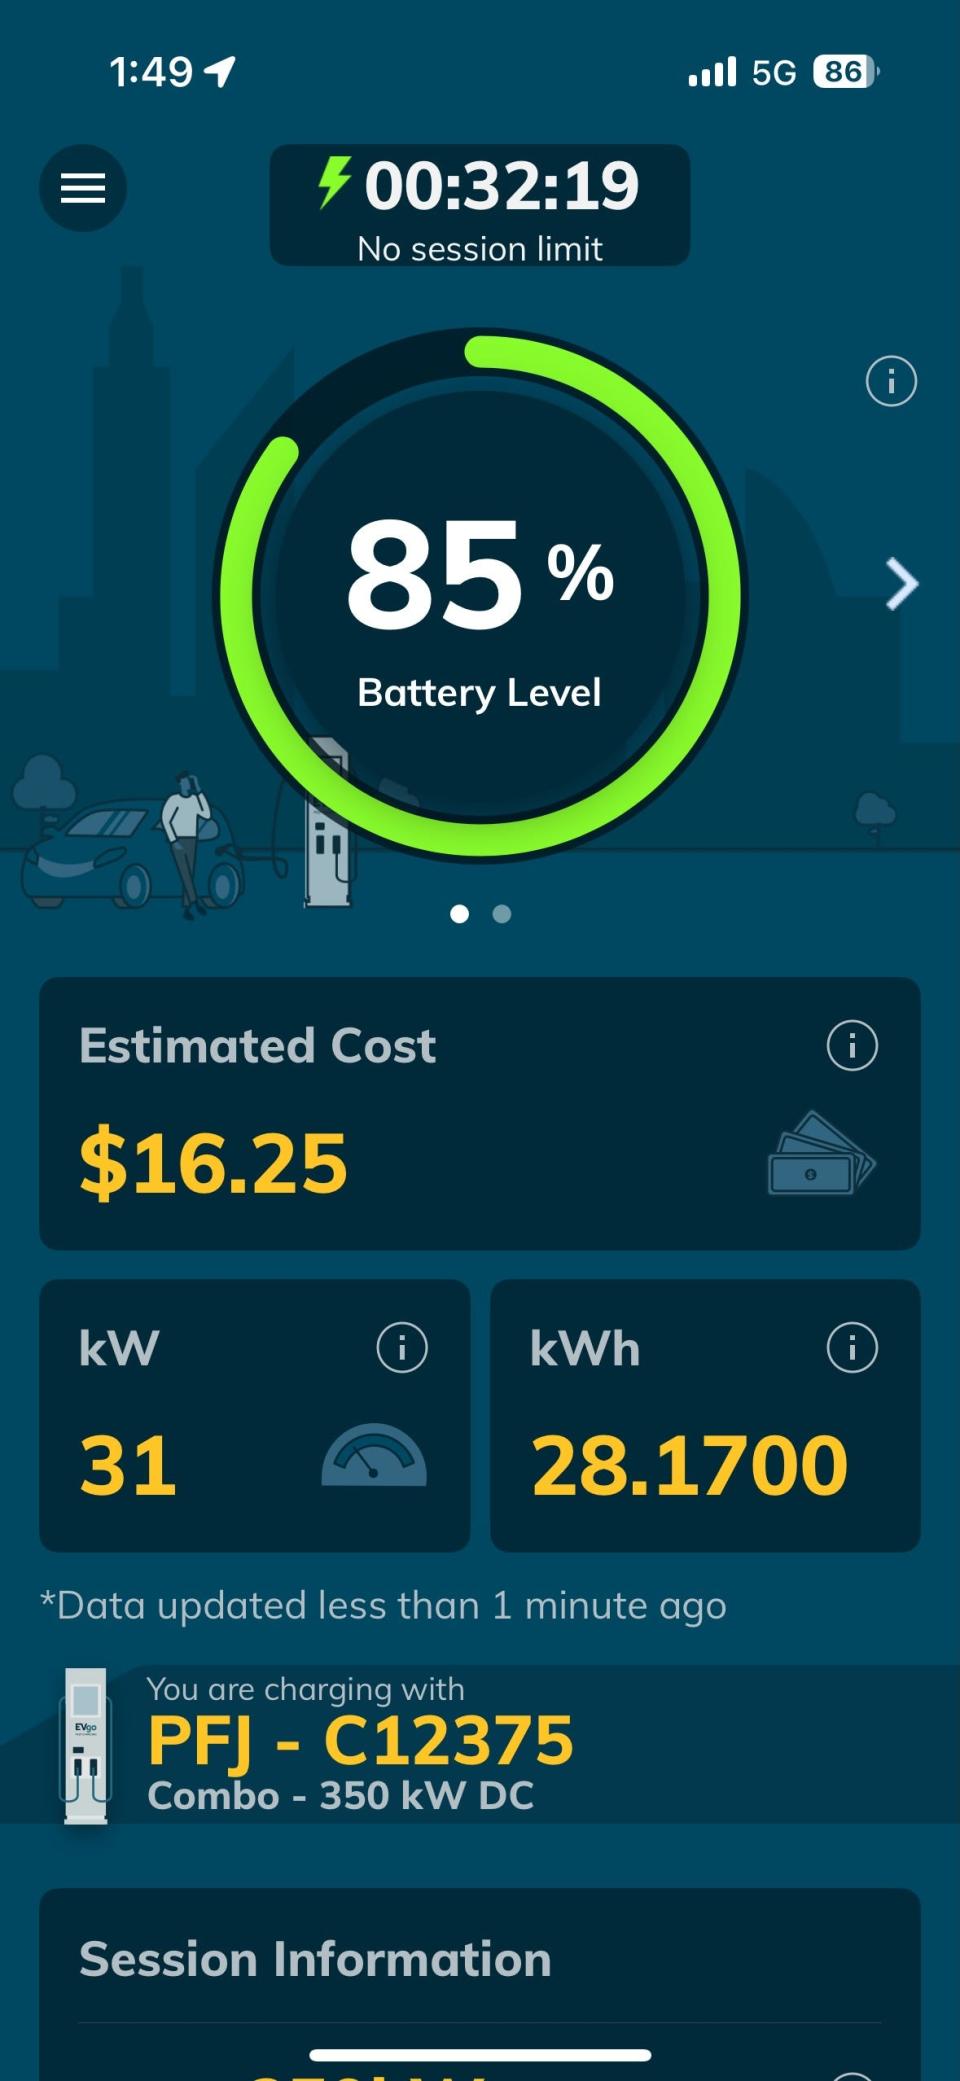 EVgo's smartphone app provides real-time charging information.